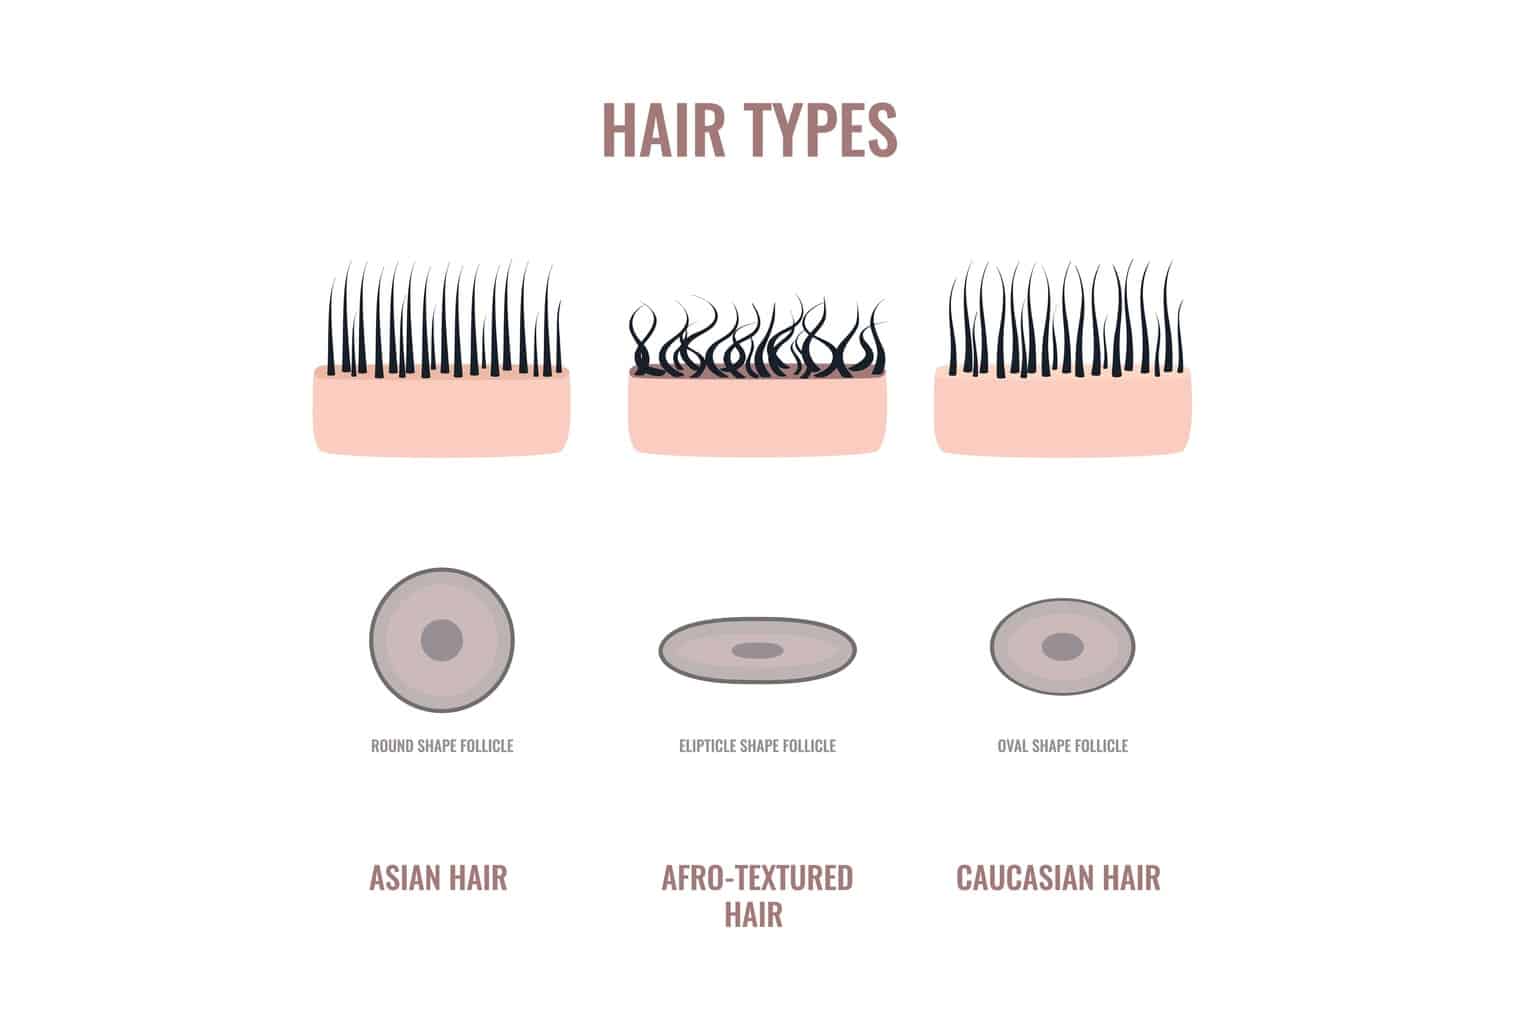 Hair Types and Ethnicity